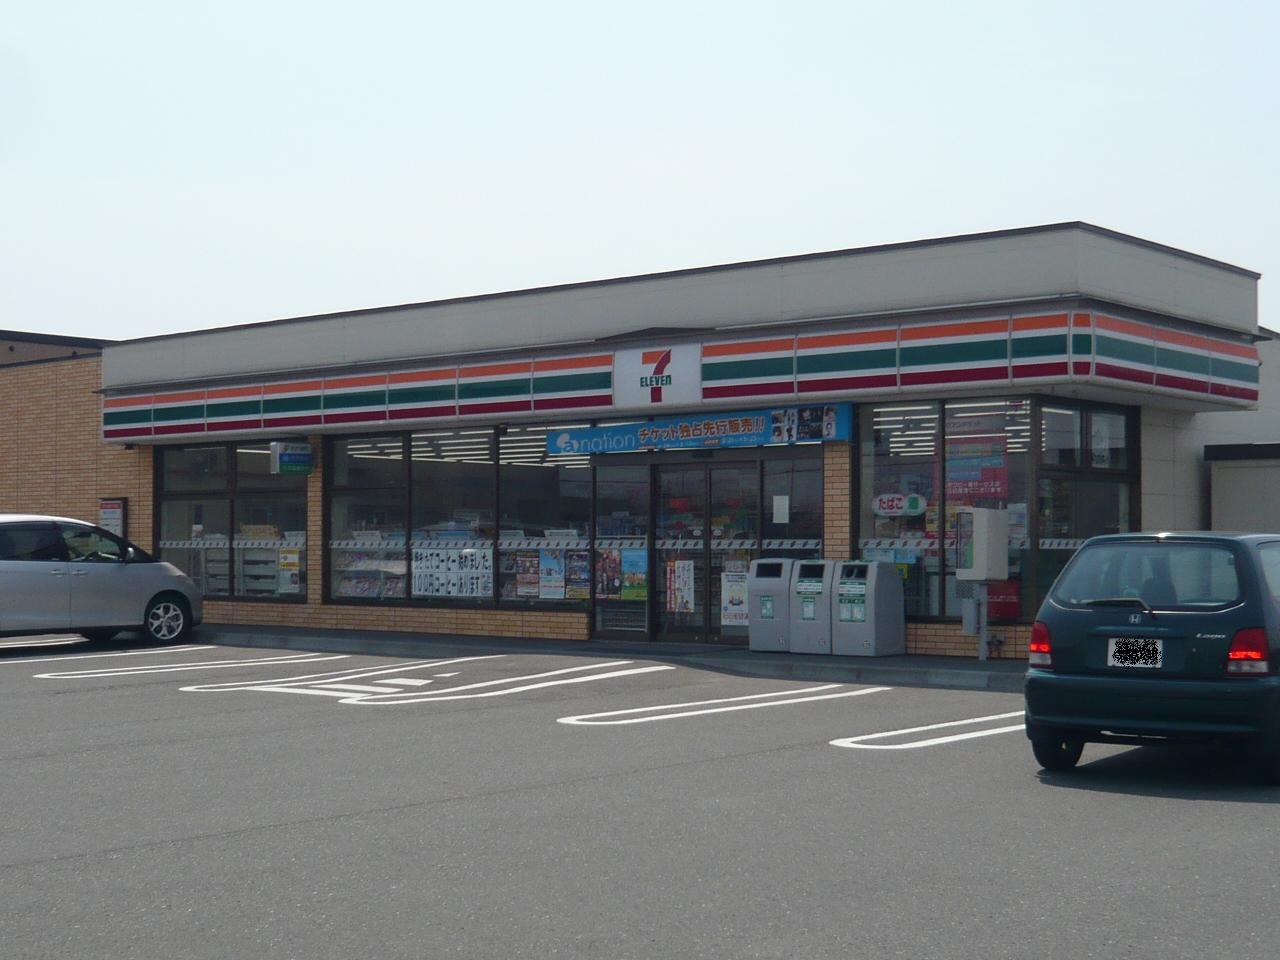 Convenience store. Seven-Eleven 422m to Tomakomai Numanohata Kitamise (convenience store)